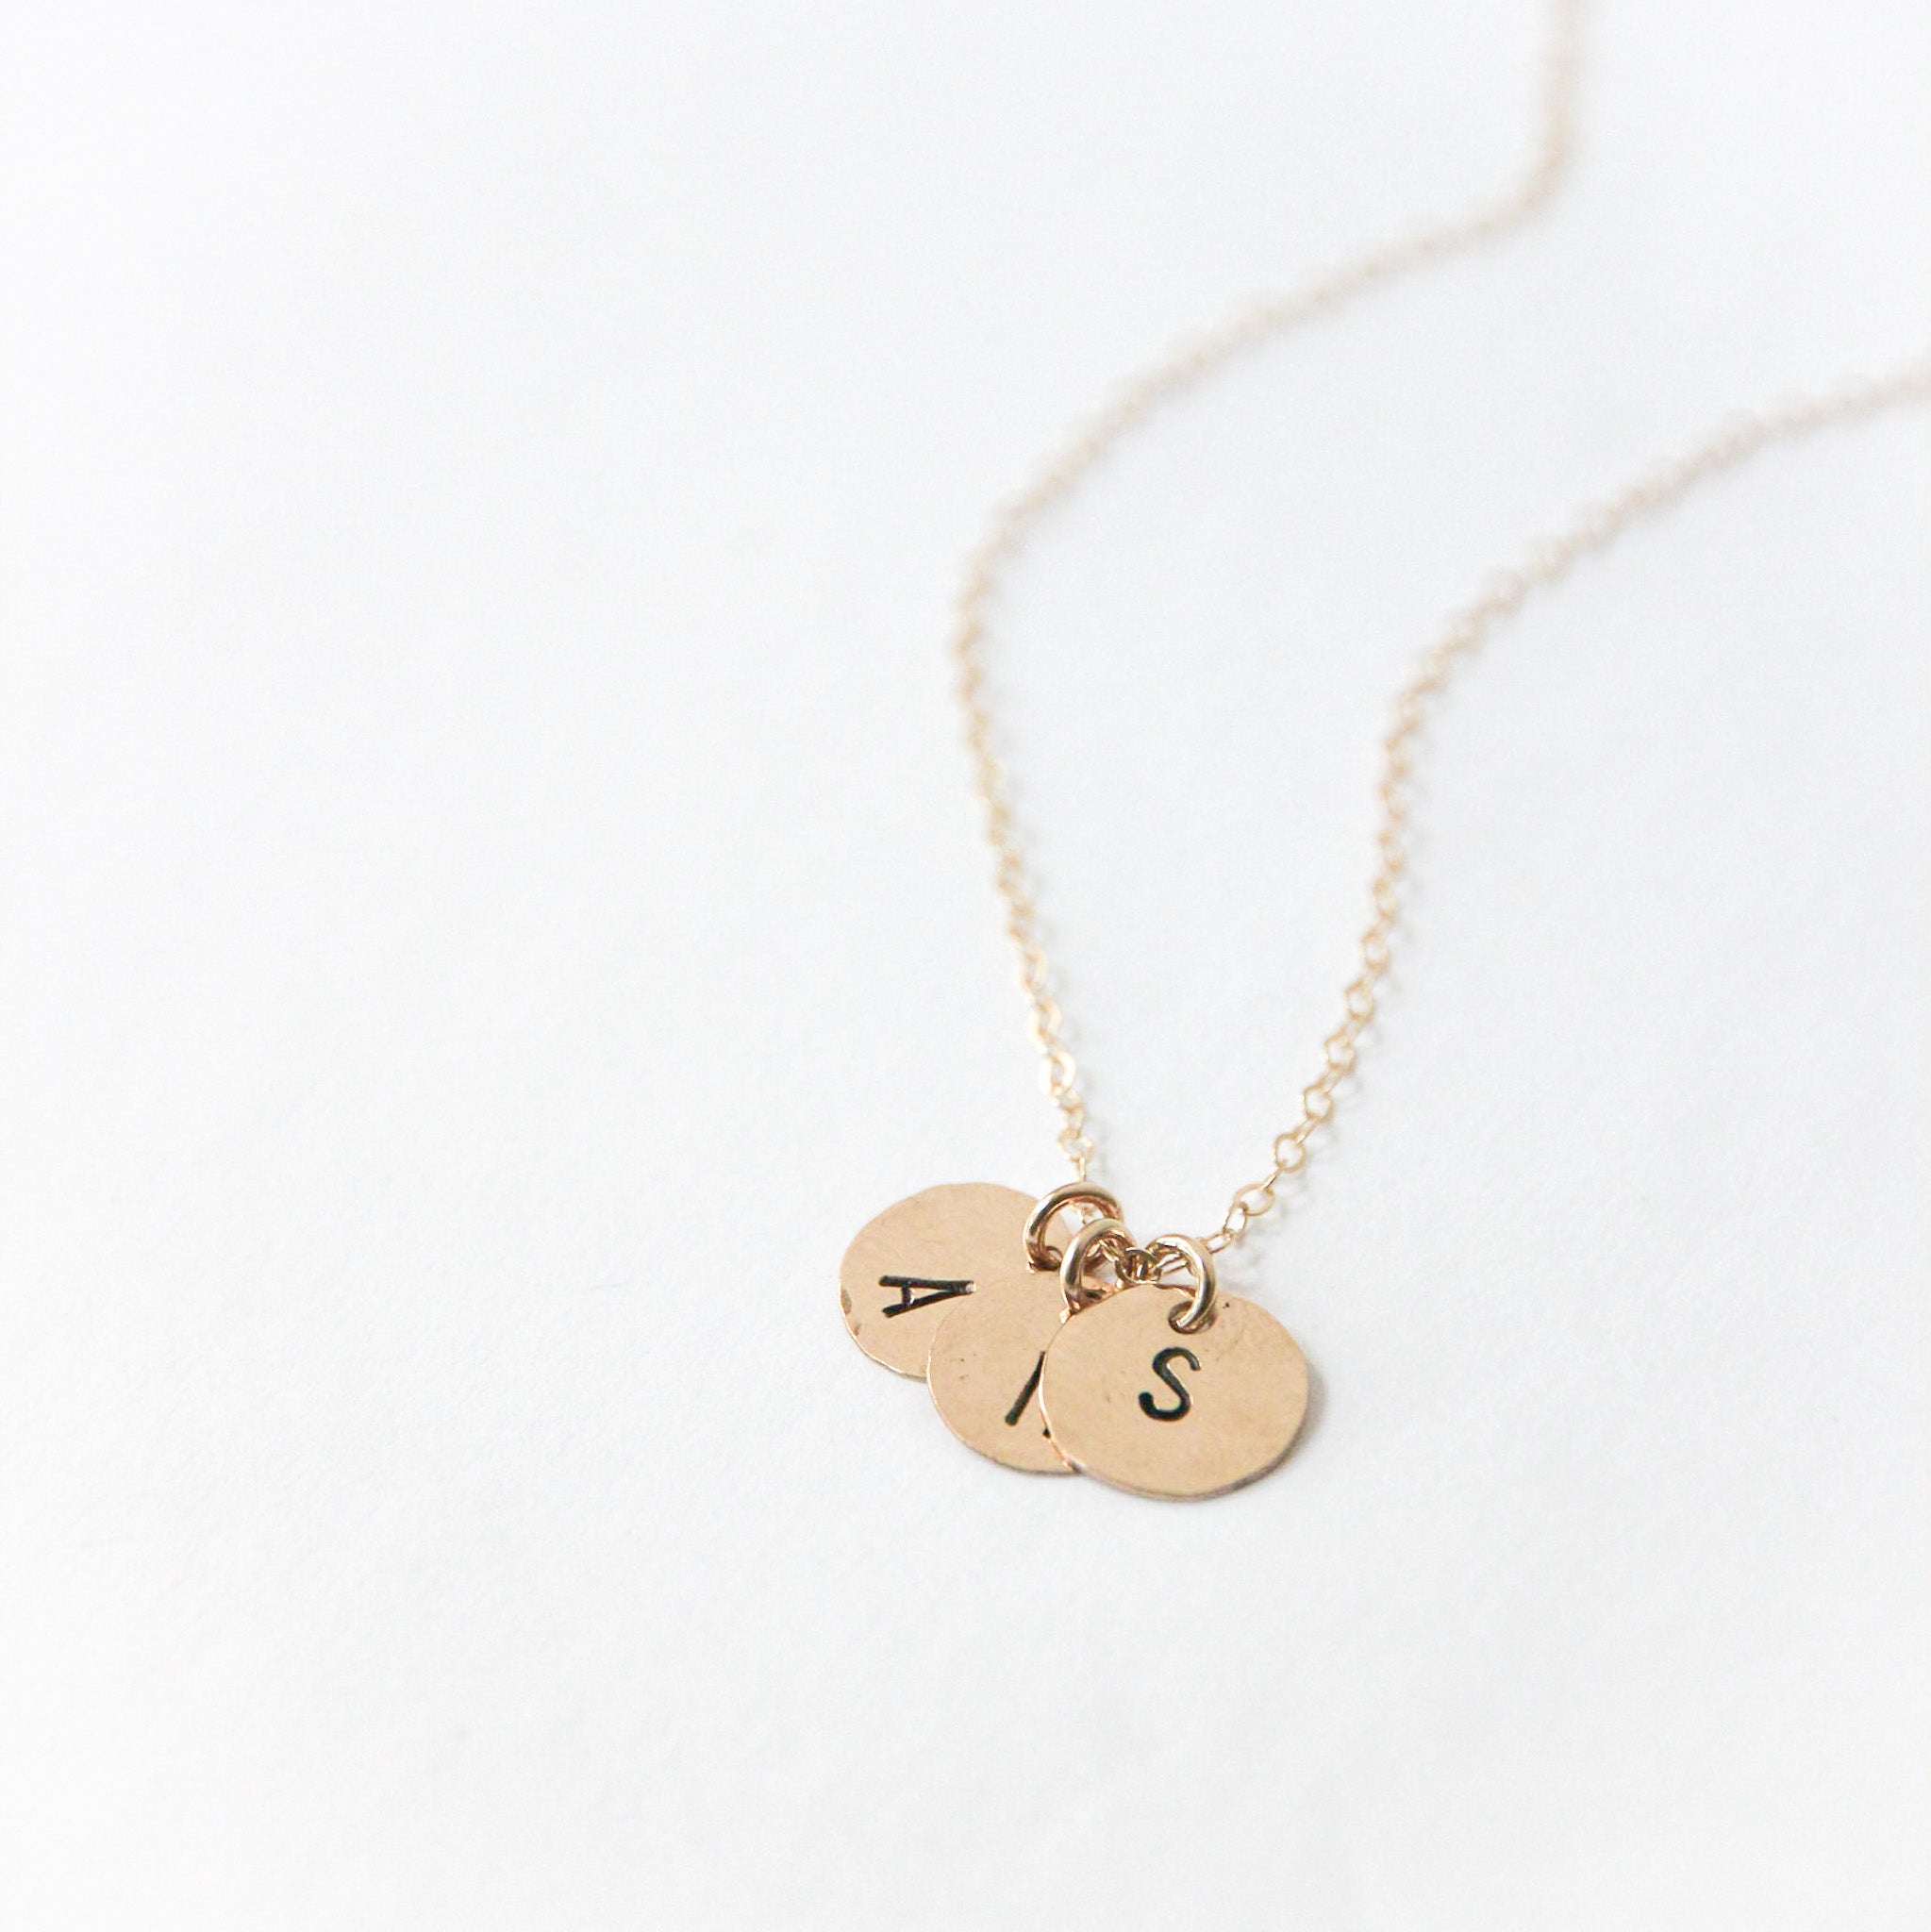 Additional Hand-Stamped Teeny Tiny Circle Charm